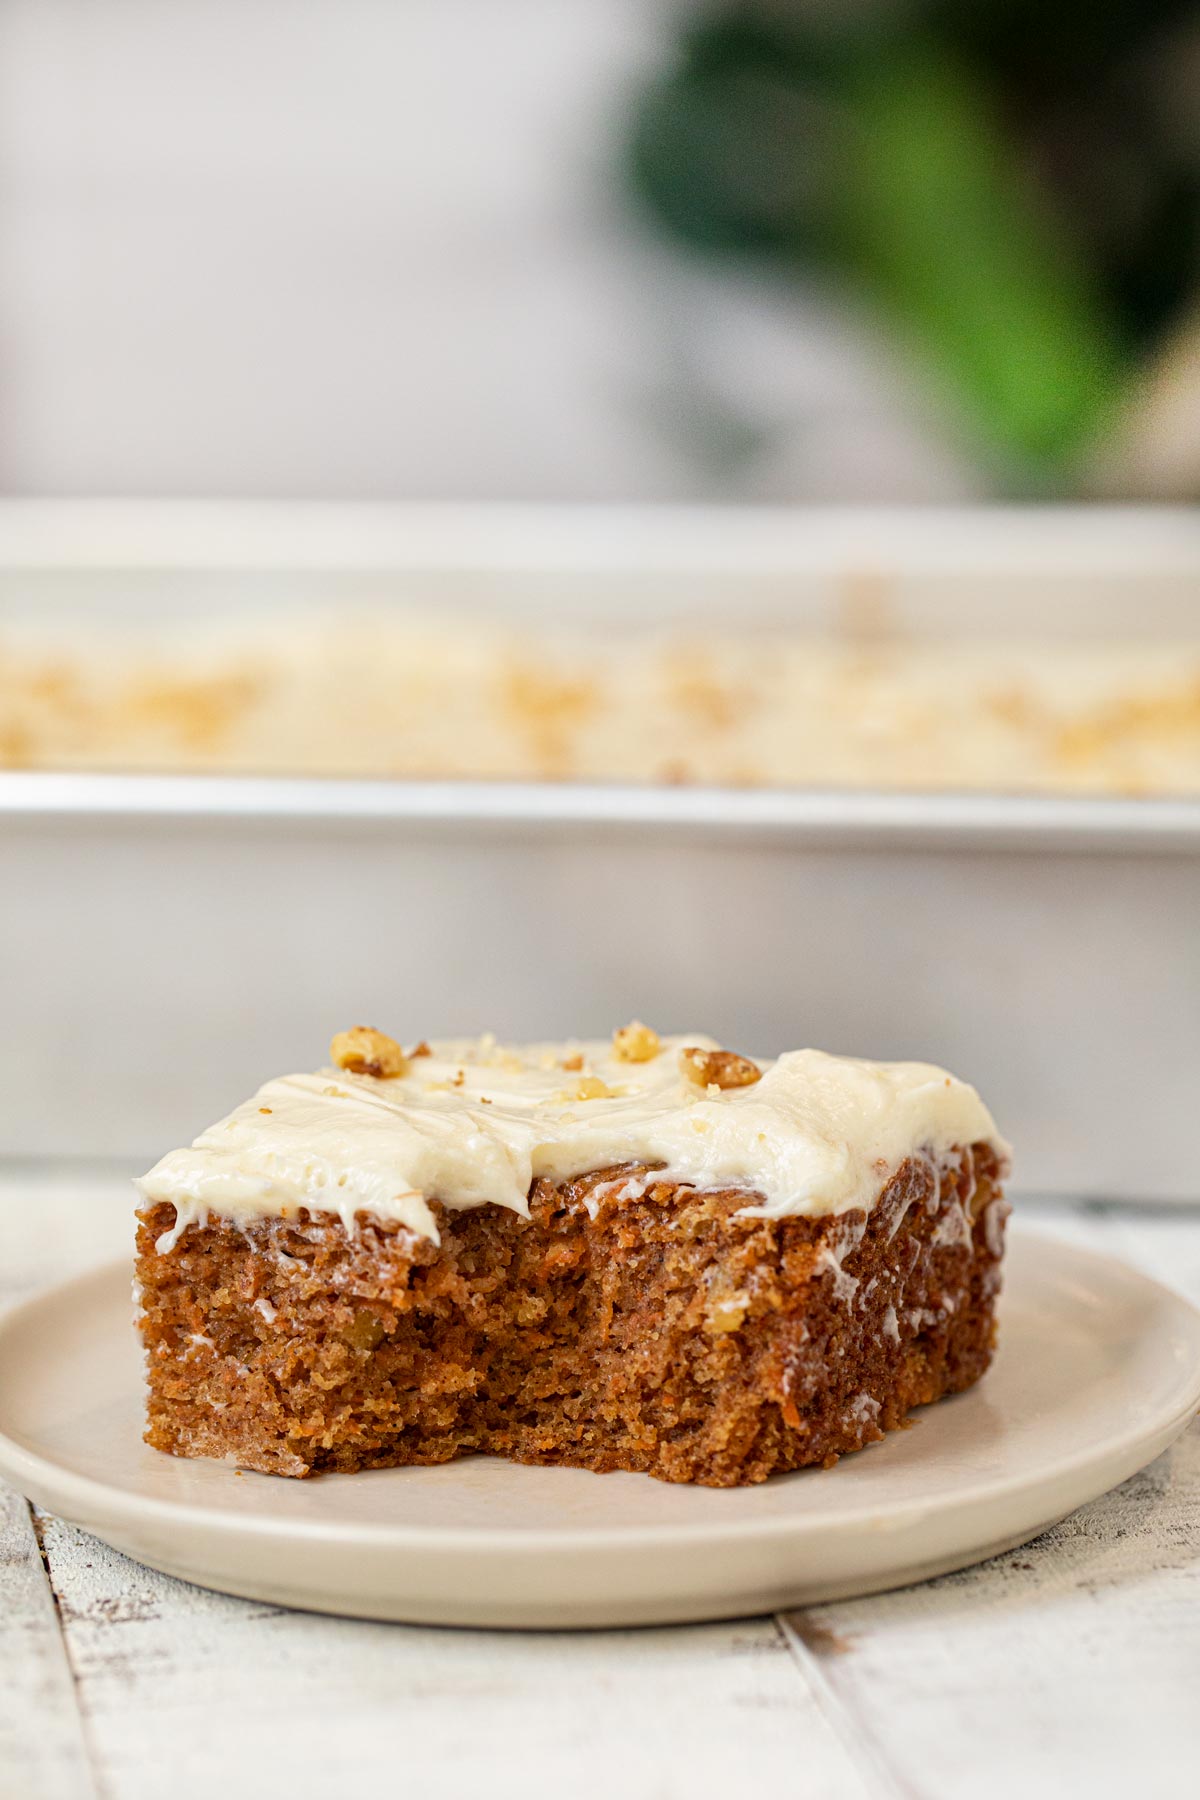 Whole Wheat Carrot Sheet Cake (w/Frosting) - Cooking Made Healthy